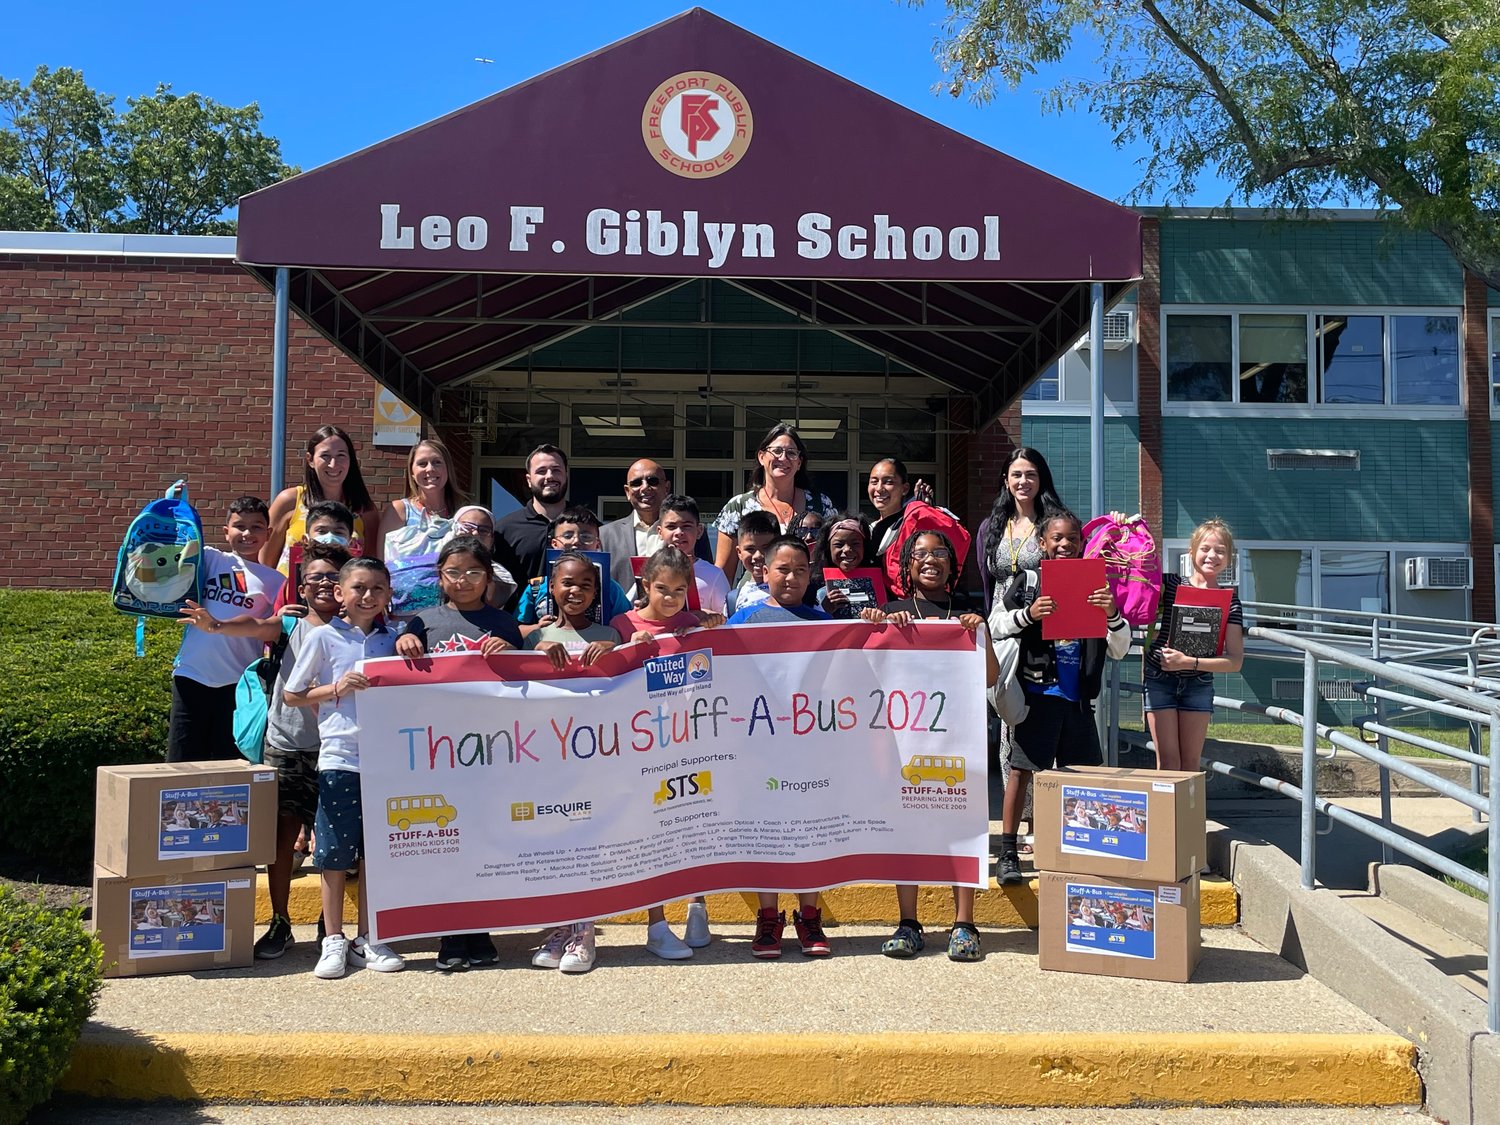 Kishore Kuncham at the 2022 Stuff-A-Bus program with United Way of Long Island at Leo F. Giblyn School.